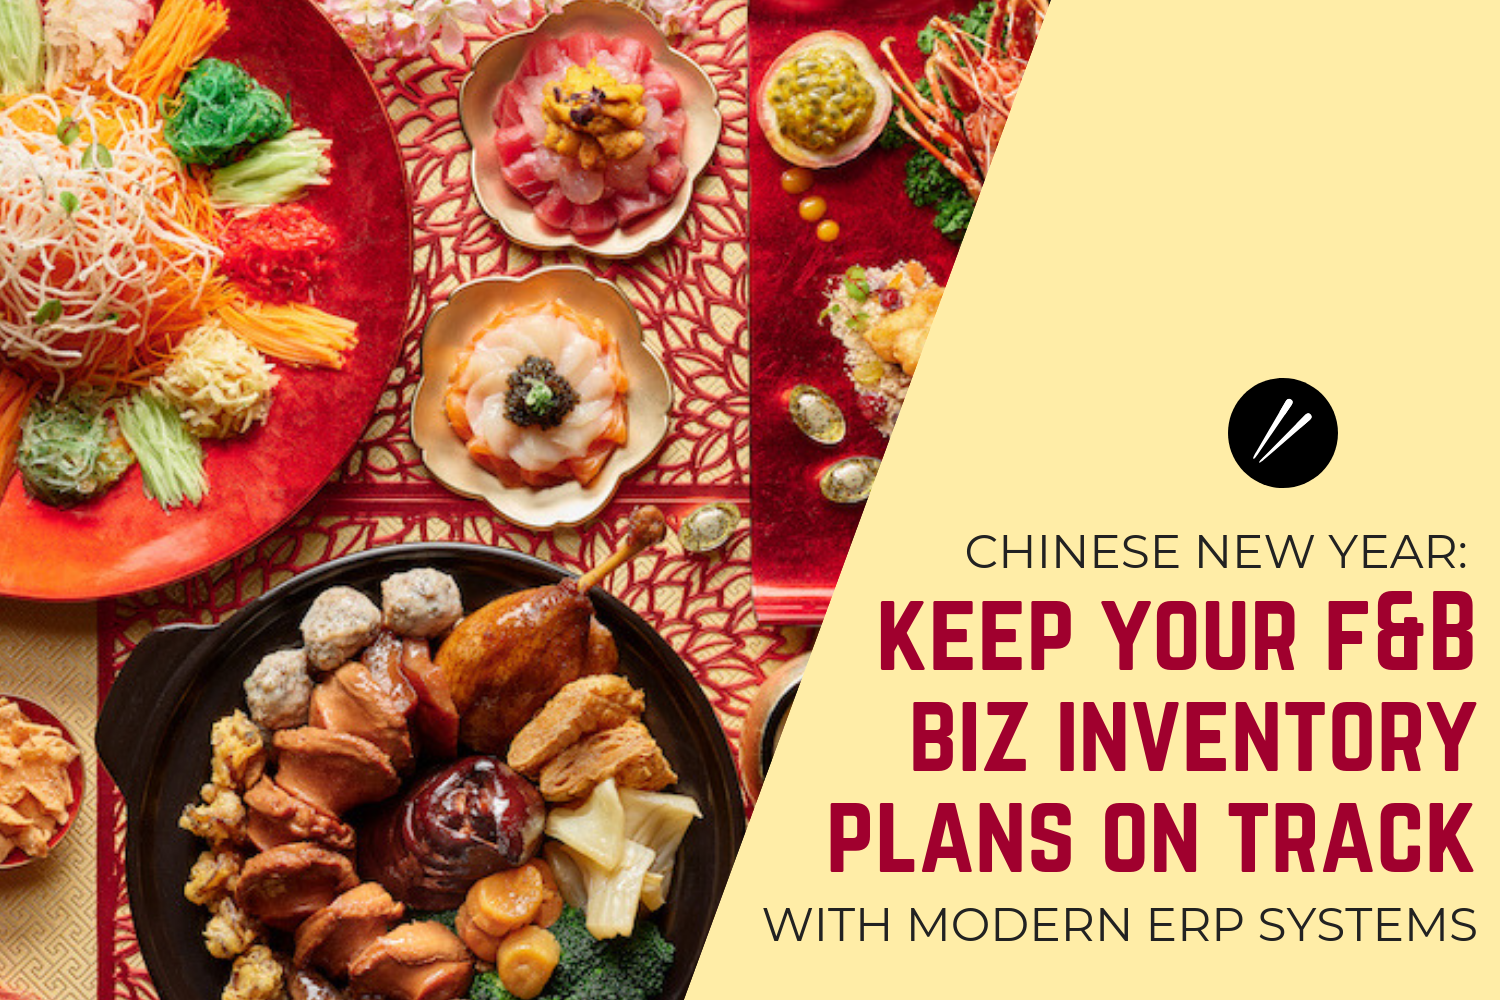 Chinese New Year Inventory Planning Tips for Food & Beverage Businesses